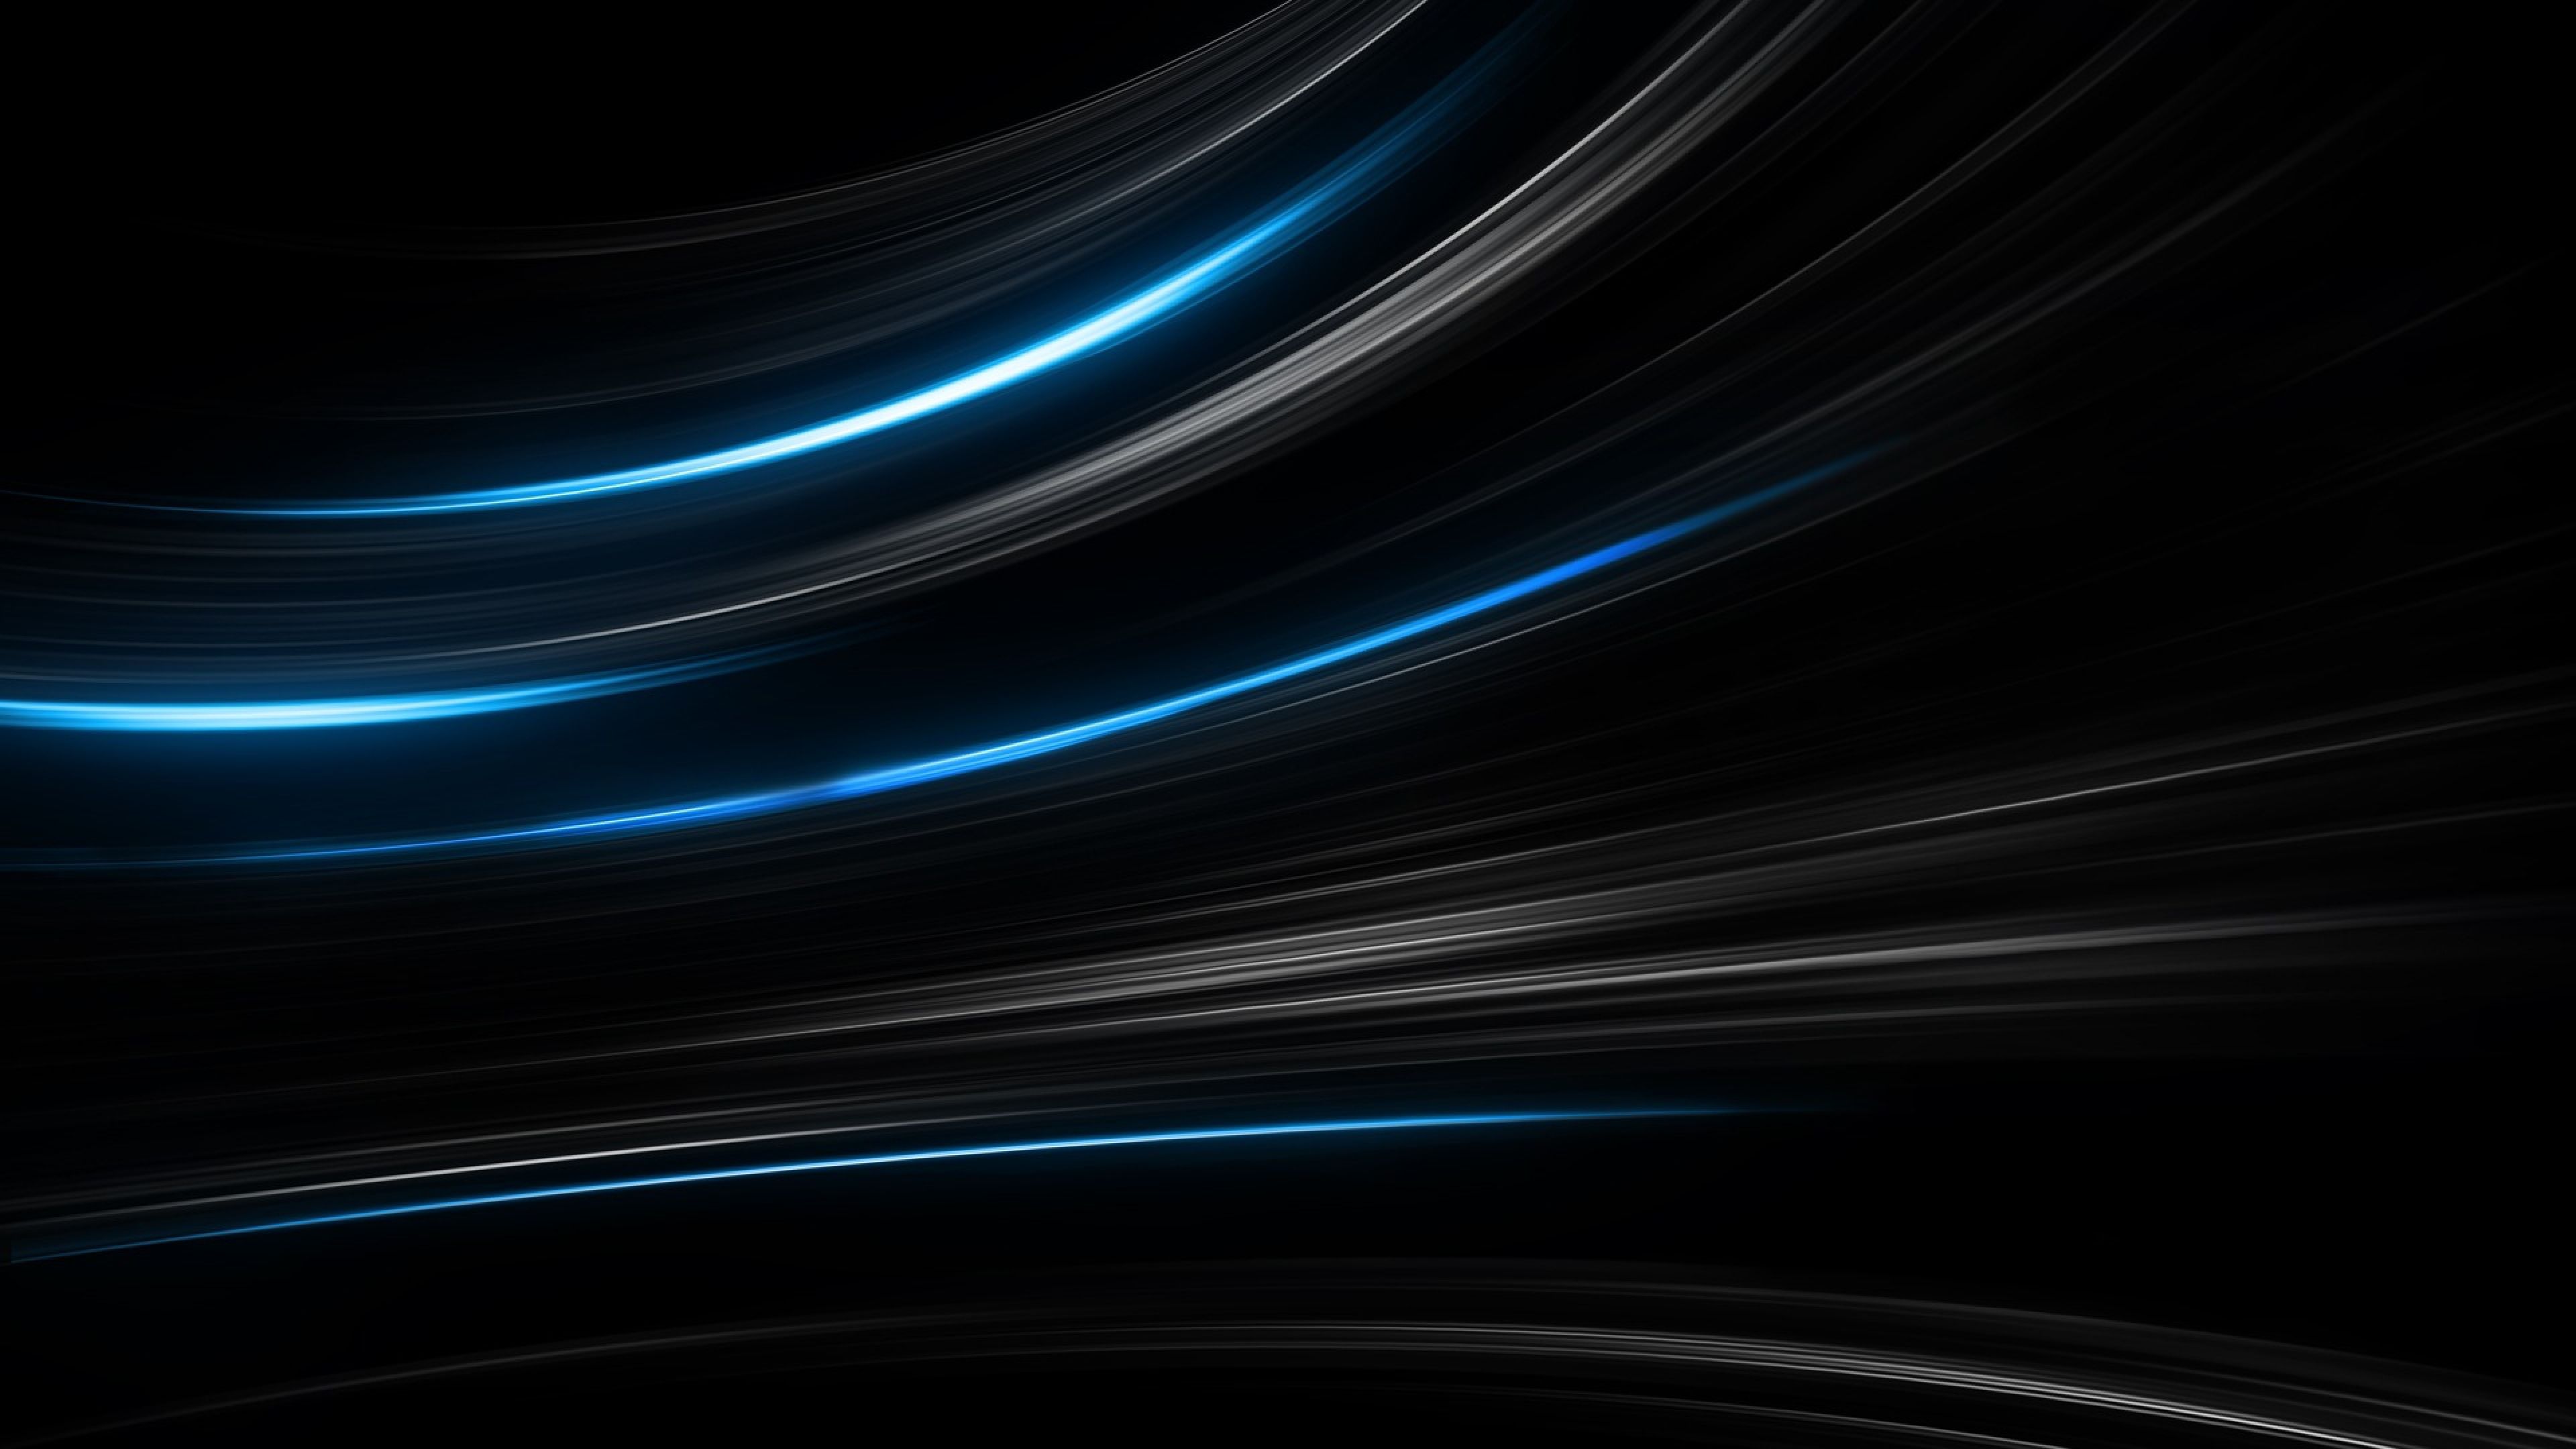 Black and Blue Images 2231 - HD Wallpapers Site